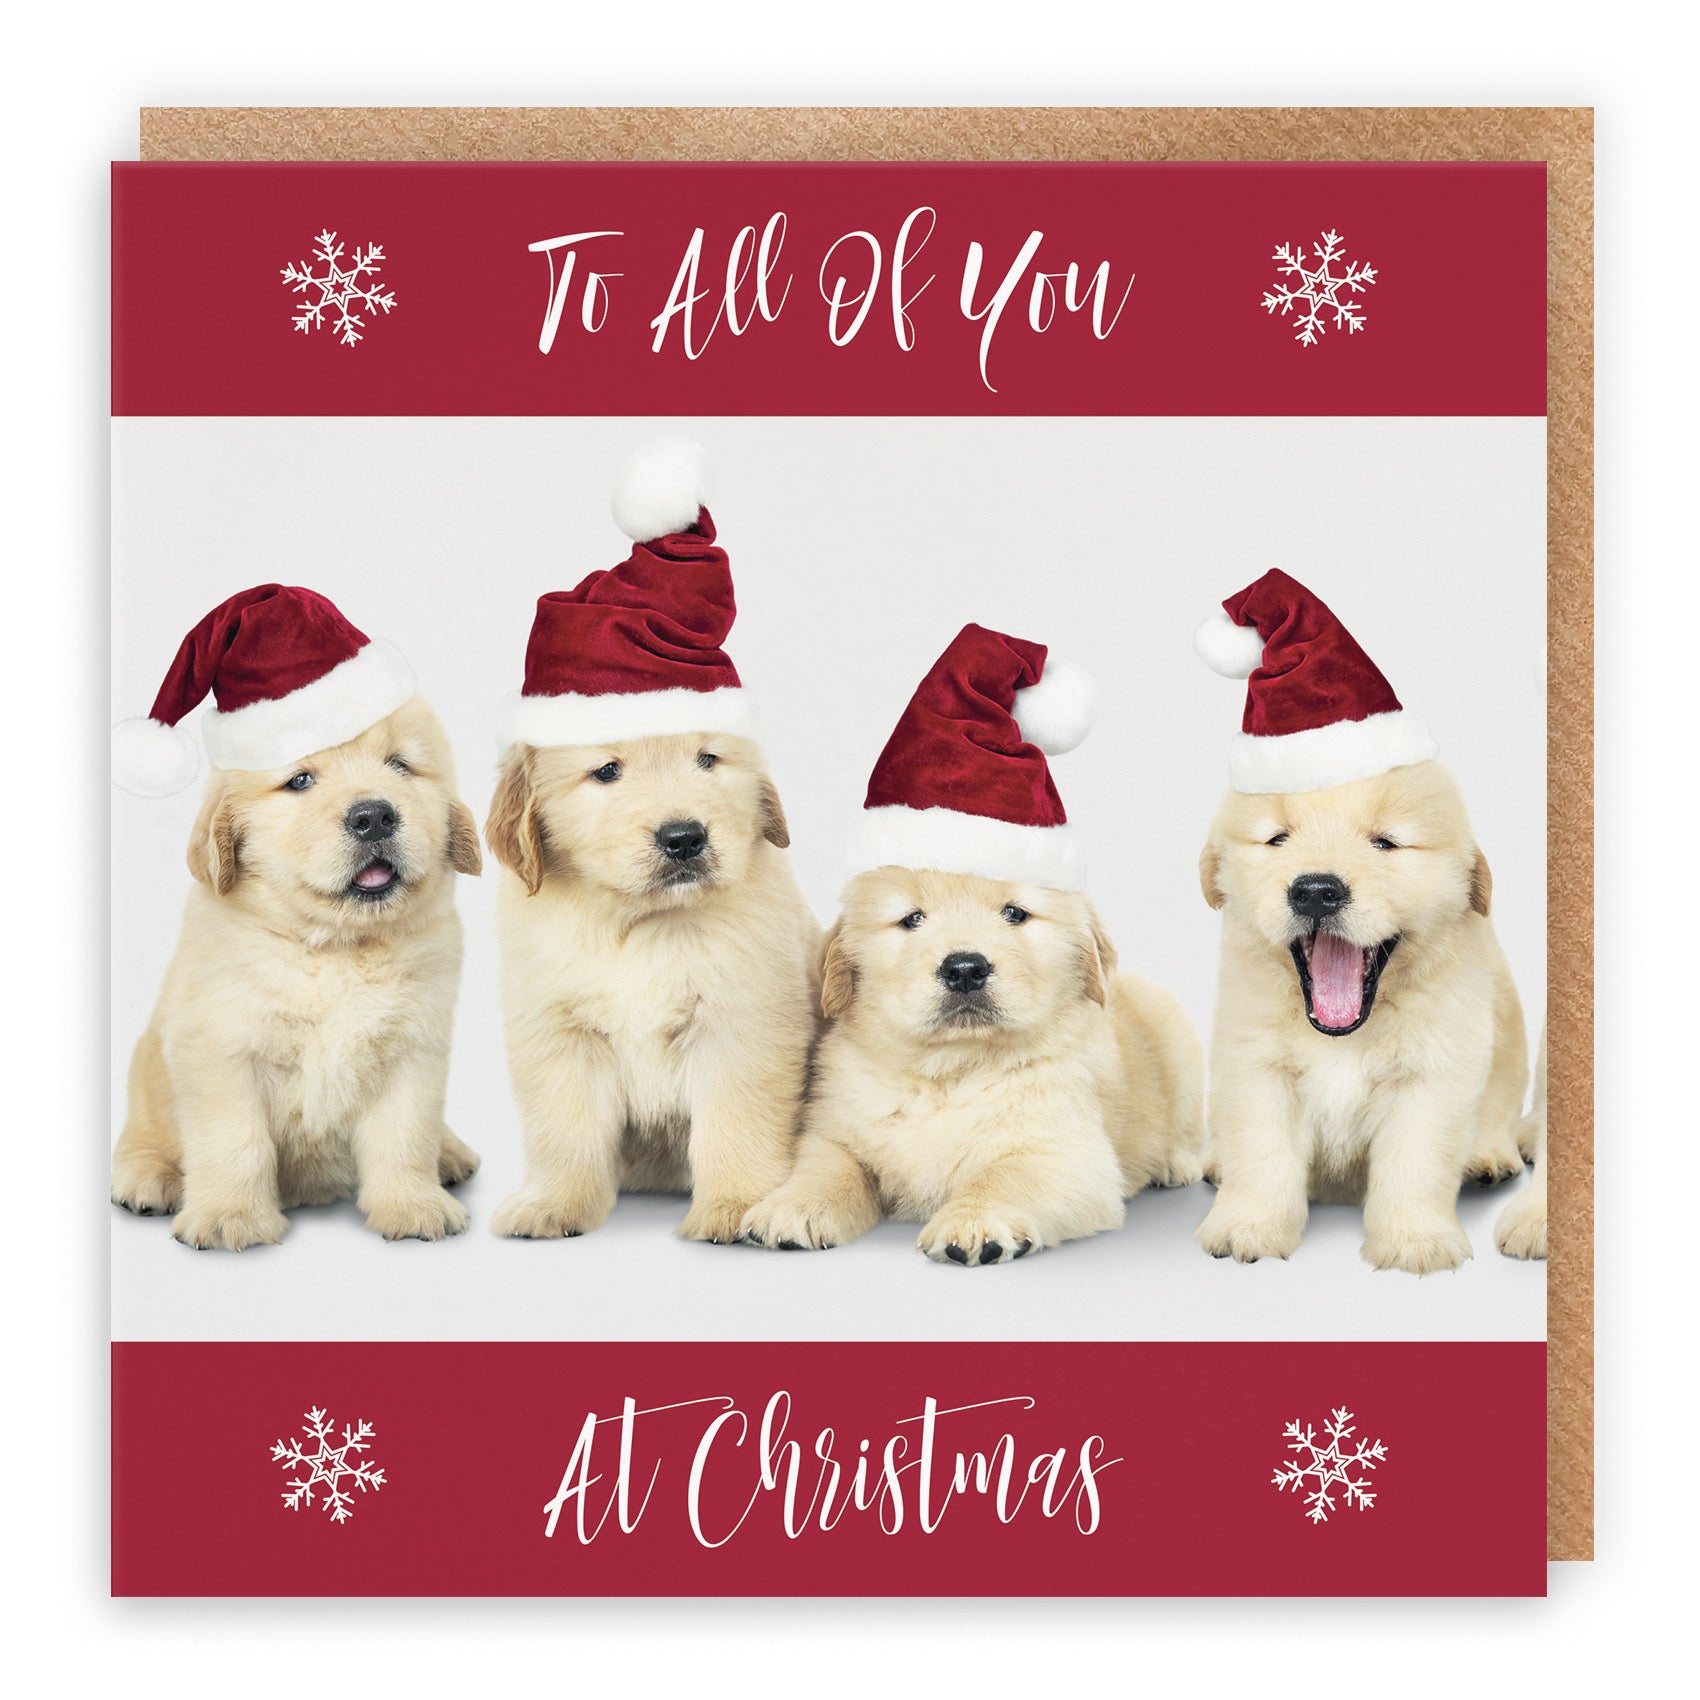 To All Of You Christmas Card Puppy - Default Title (B09JZX15GD)